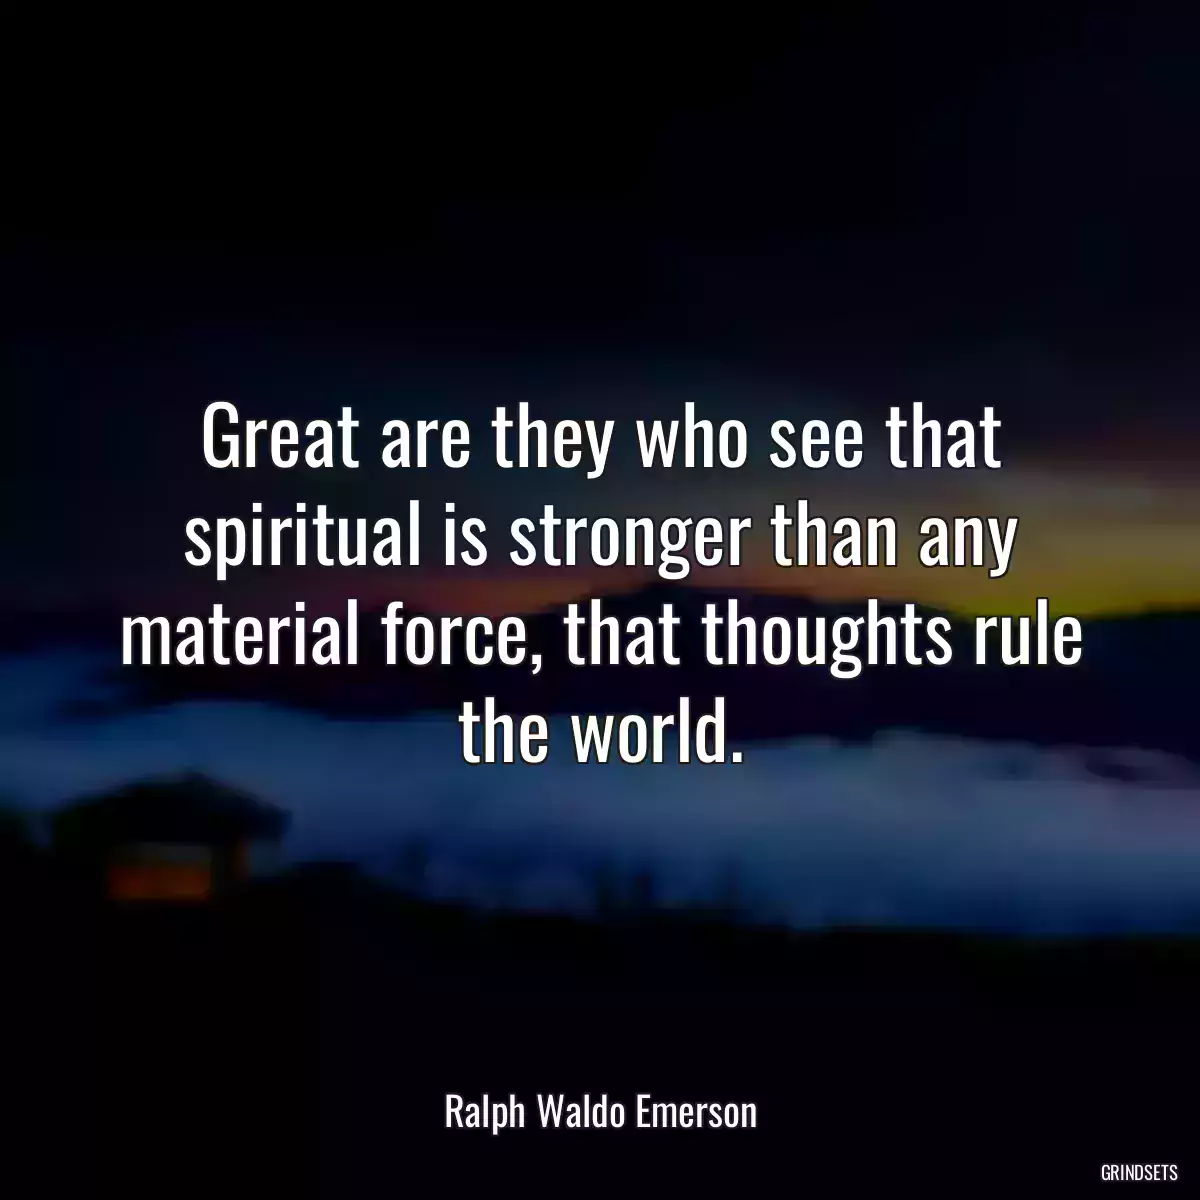 Great are they who see that spiritual is stronger than any material force, that thoughts rule the world.